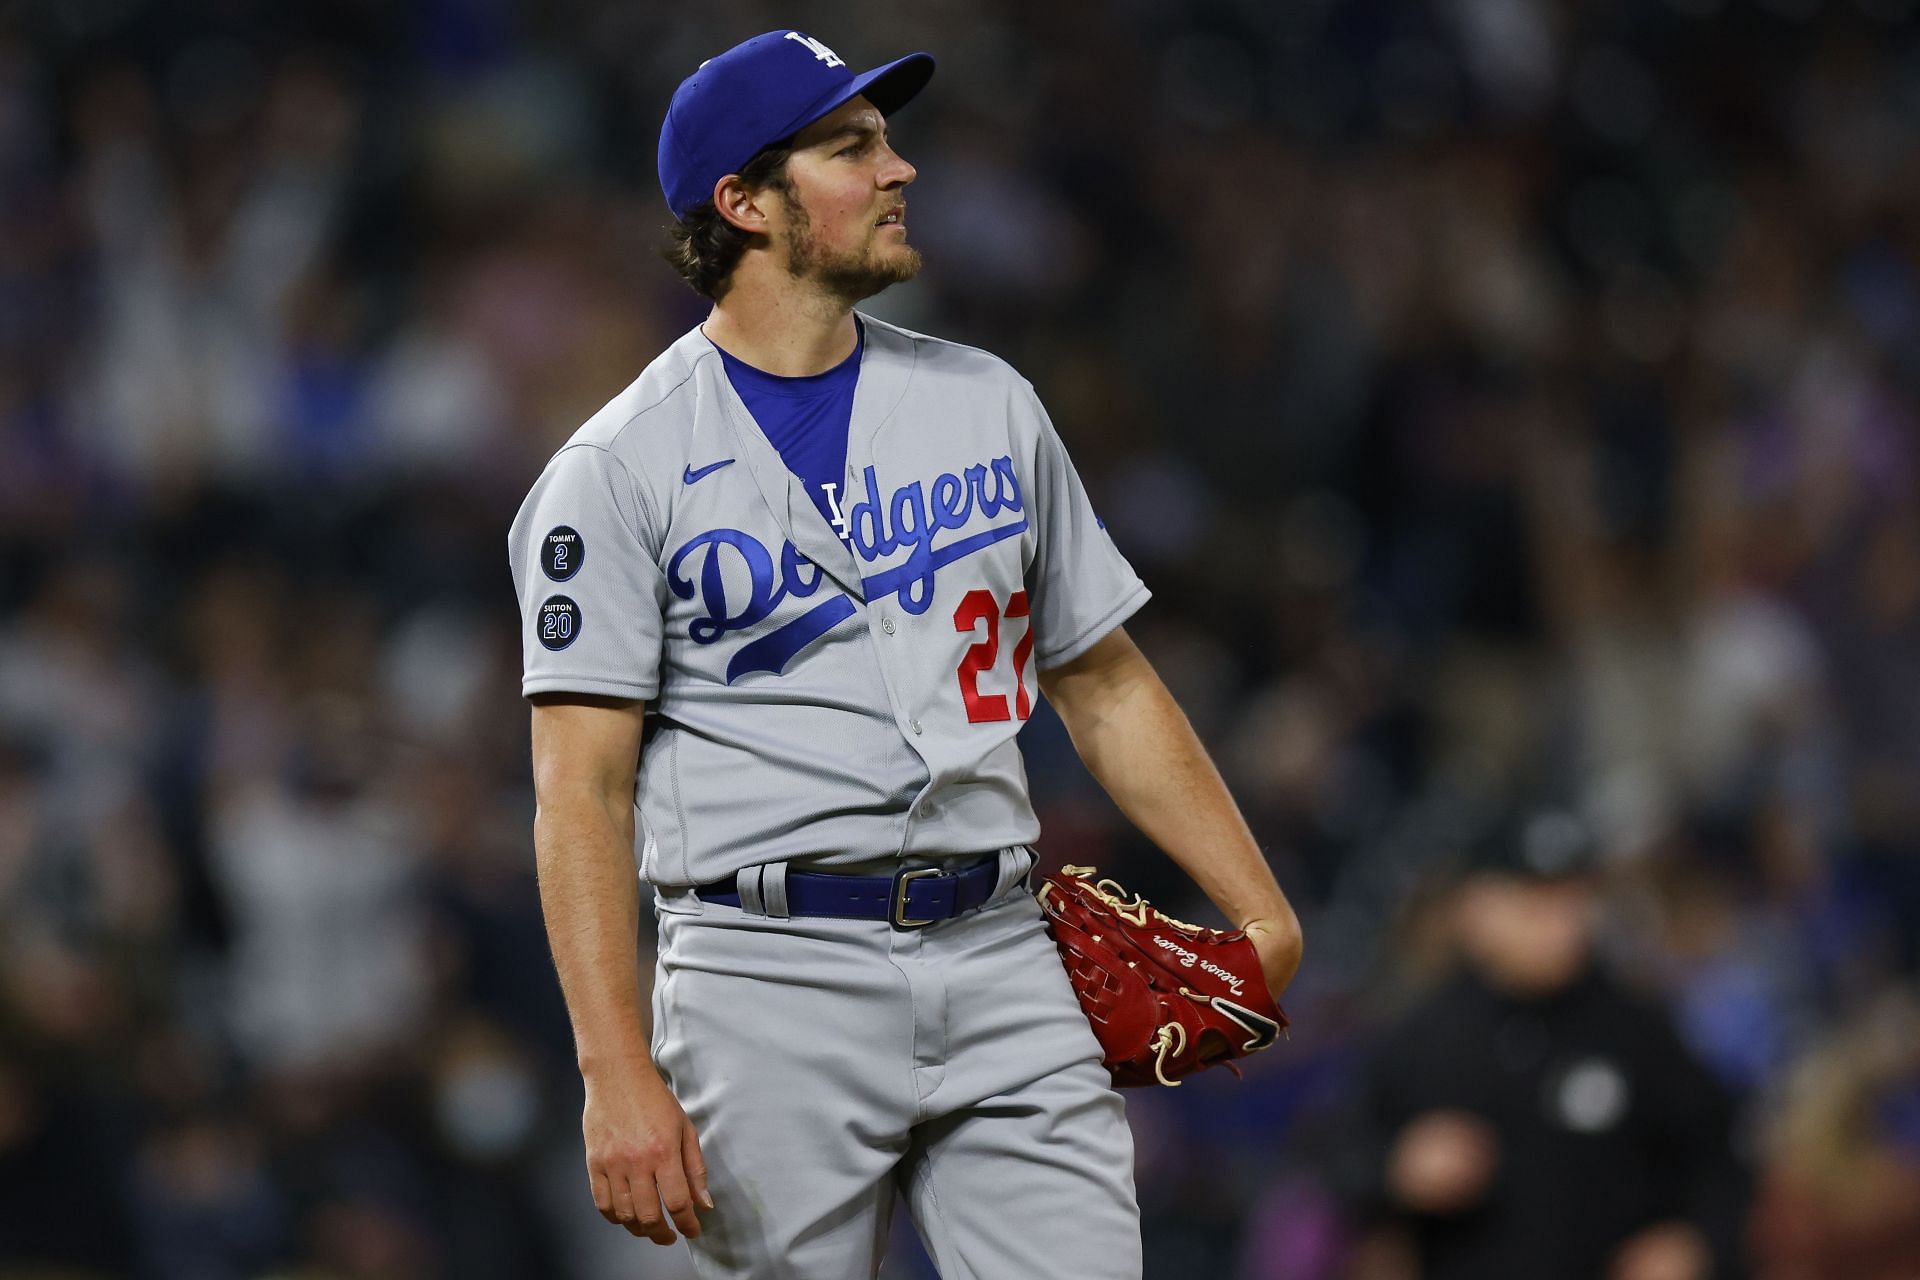 Dodgers announce Bauer will be designated for assignment